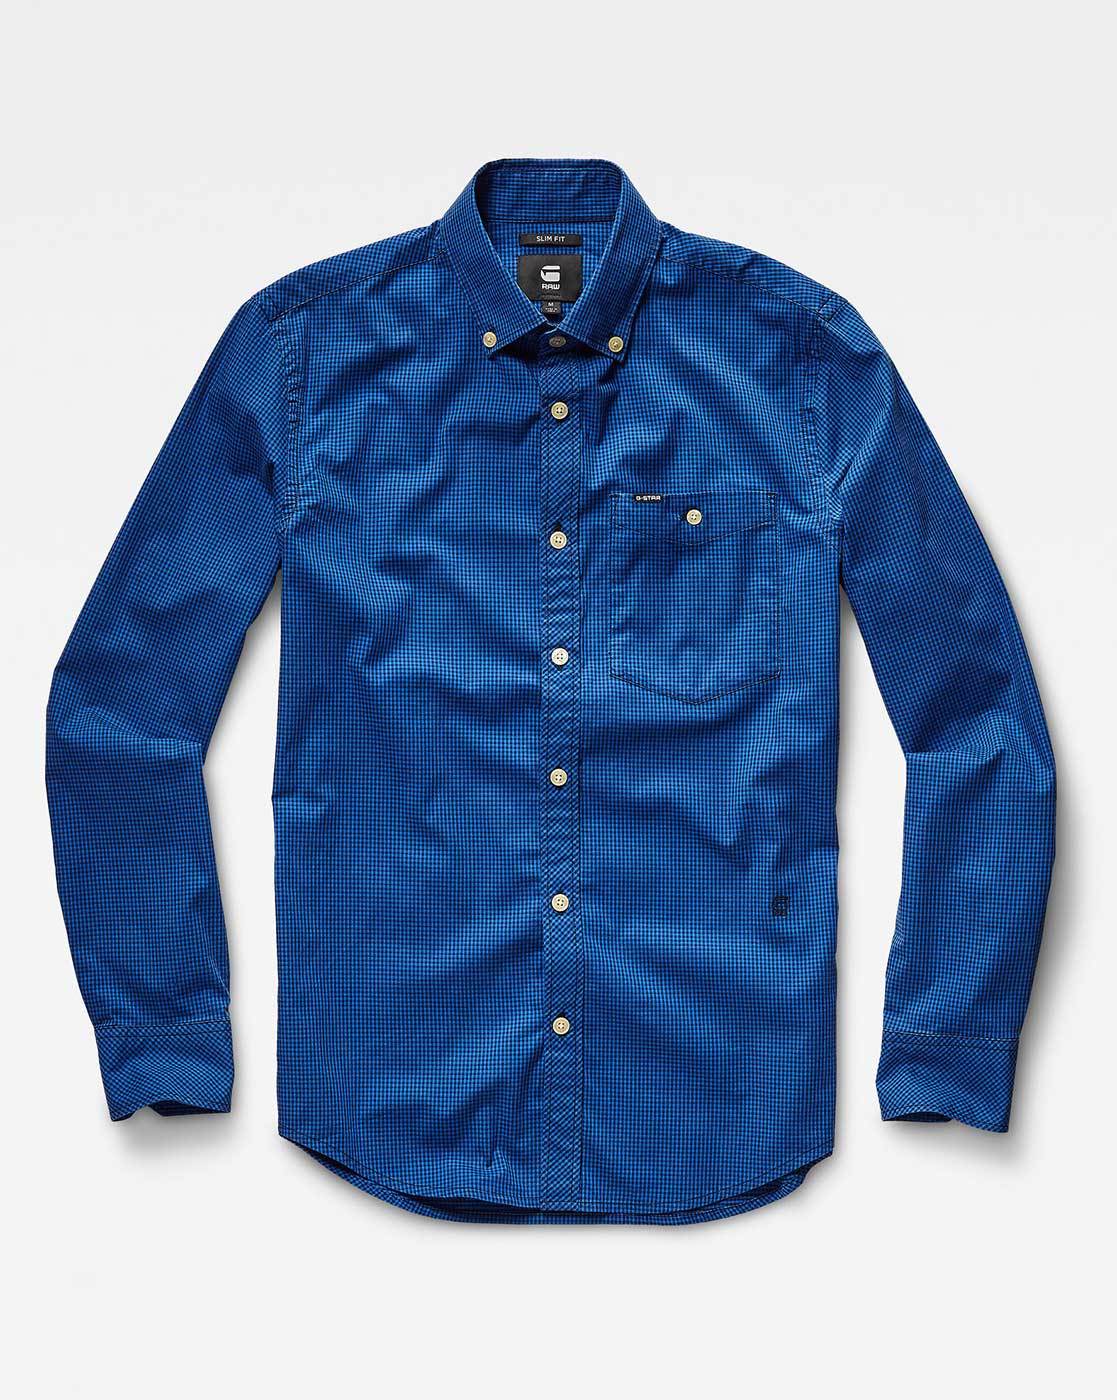 Shirts for Men by G STAR RAW 